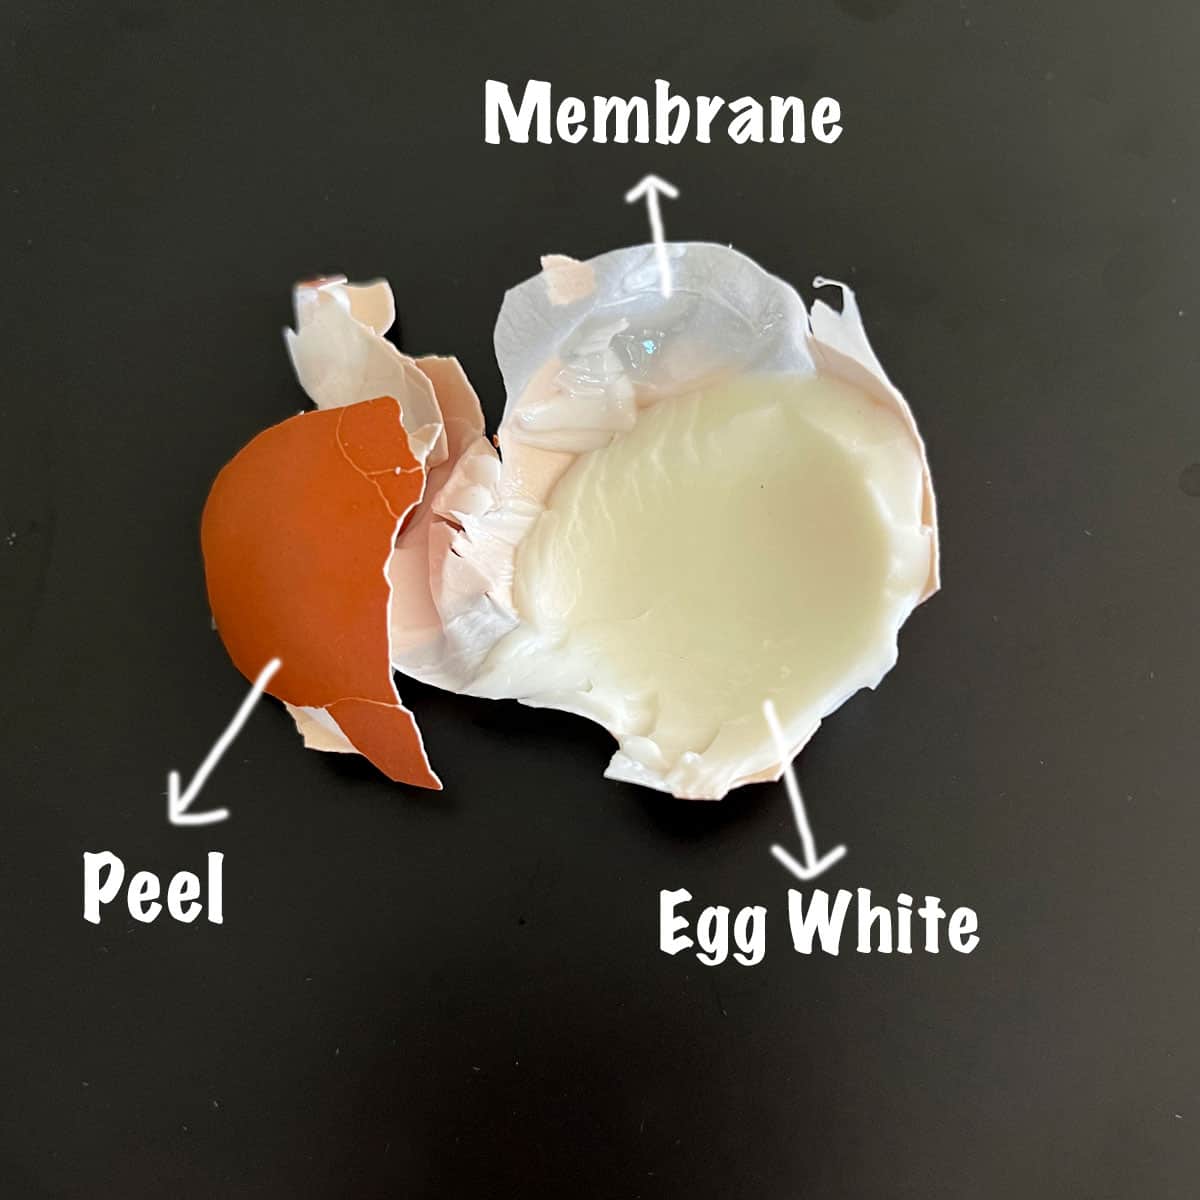 A peeled hard-boiled egg with its peel, inner membrane, and egg white.